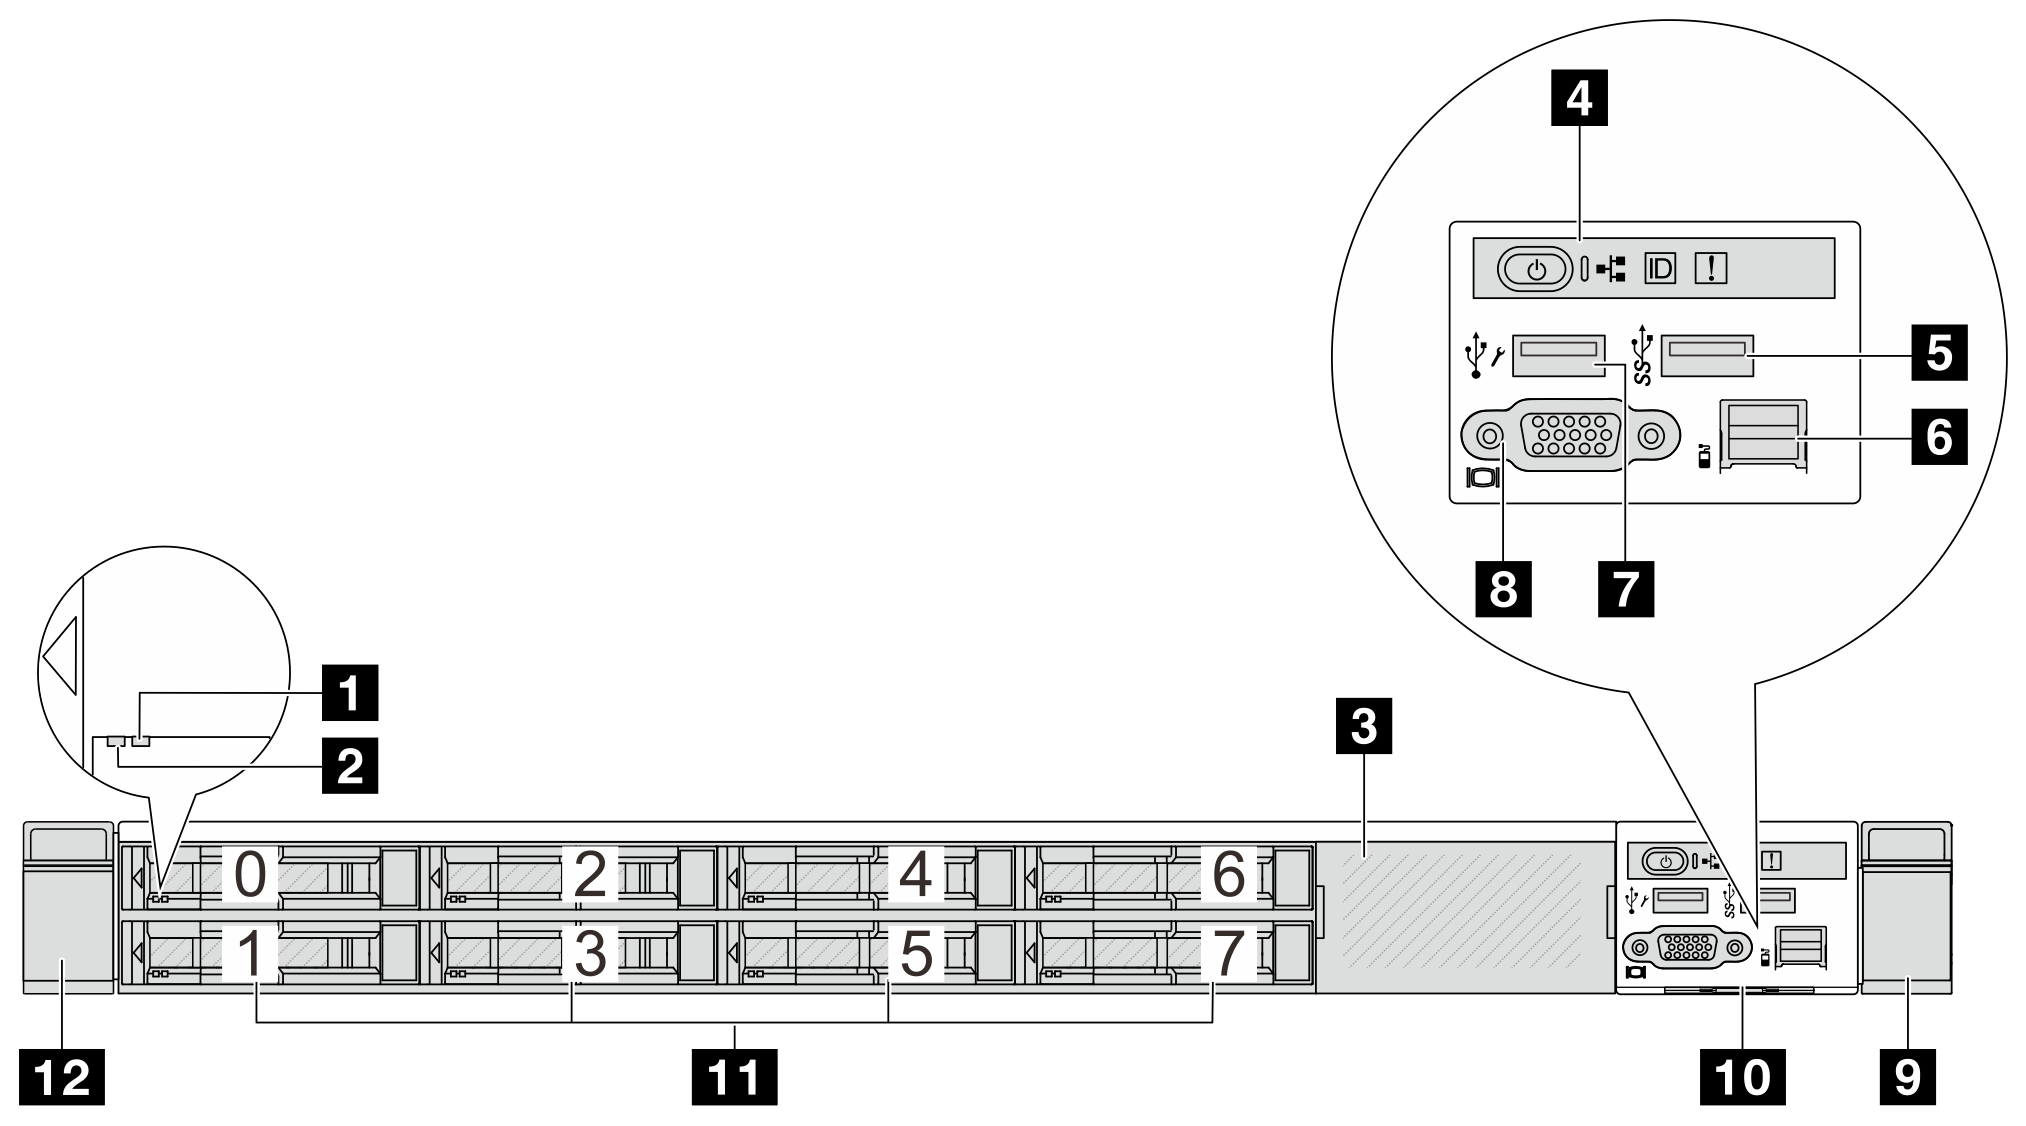 Front view of server model with eight 2.5-inch drive bays